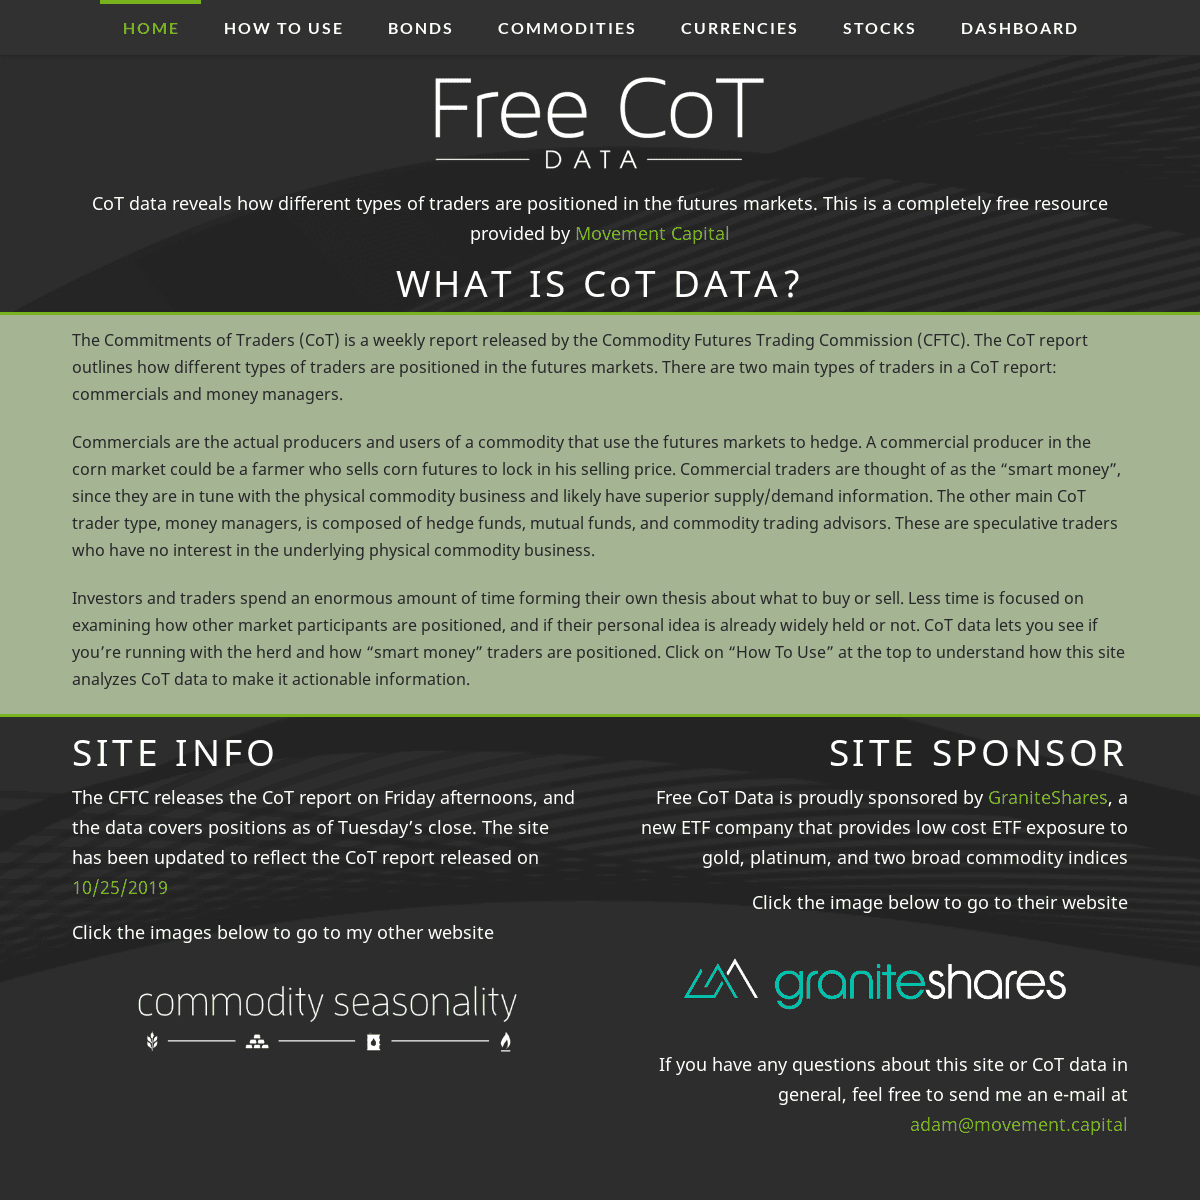 A complete backup of freecotdata.com